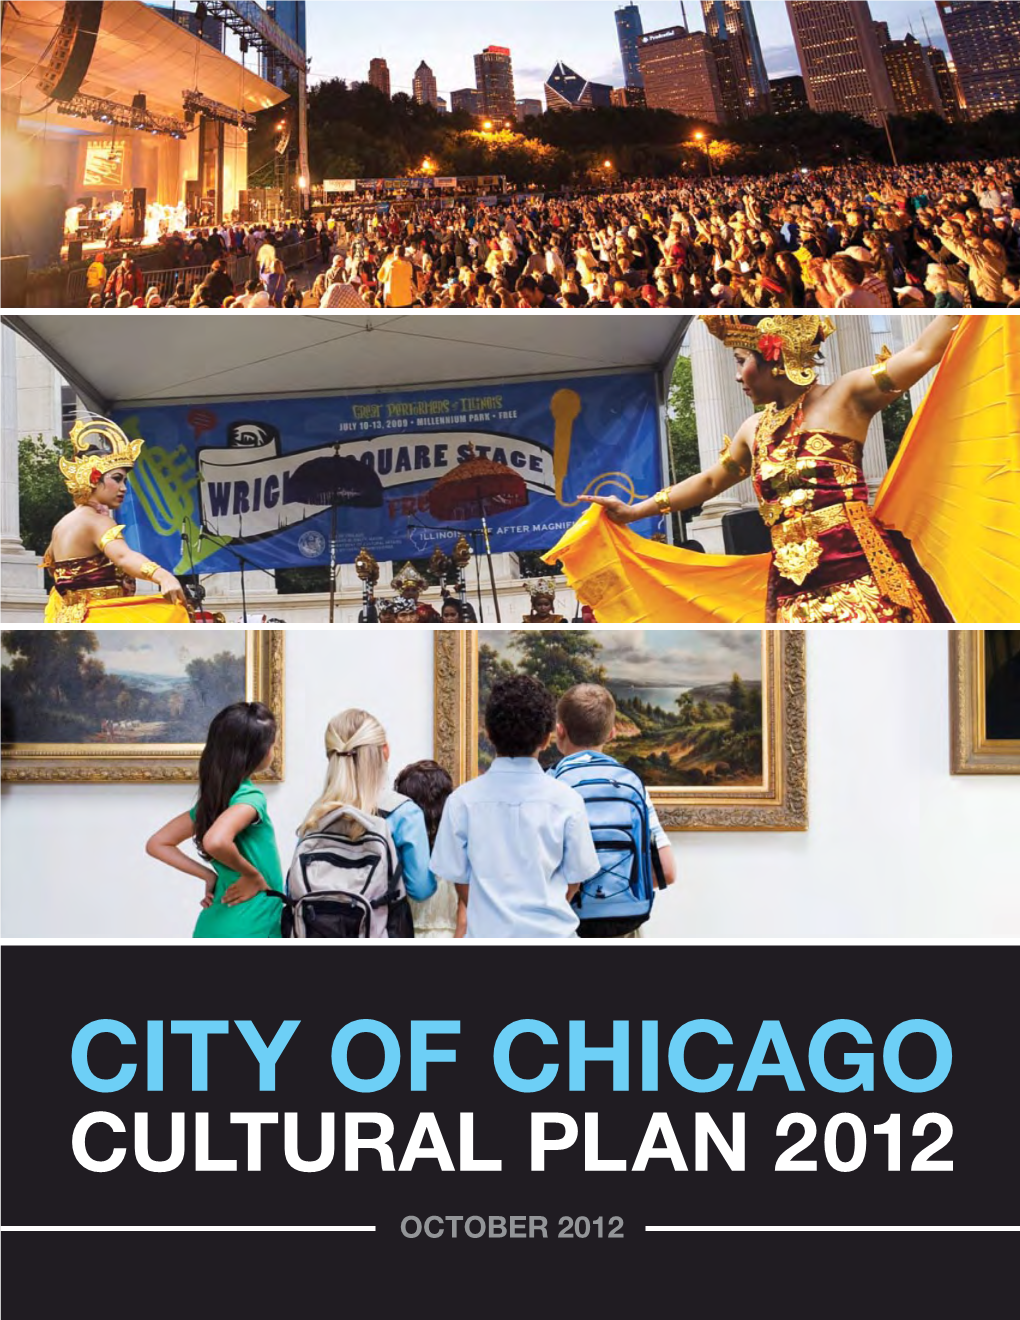 City of Chicago Cultural Plan 2012 October 2012